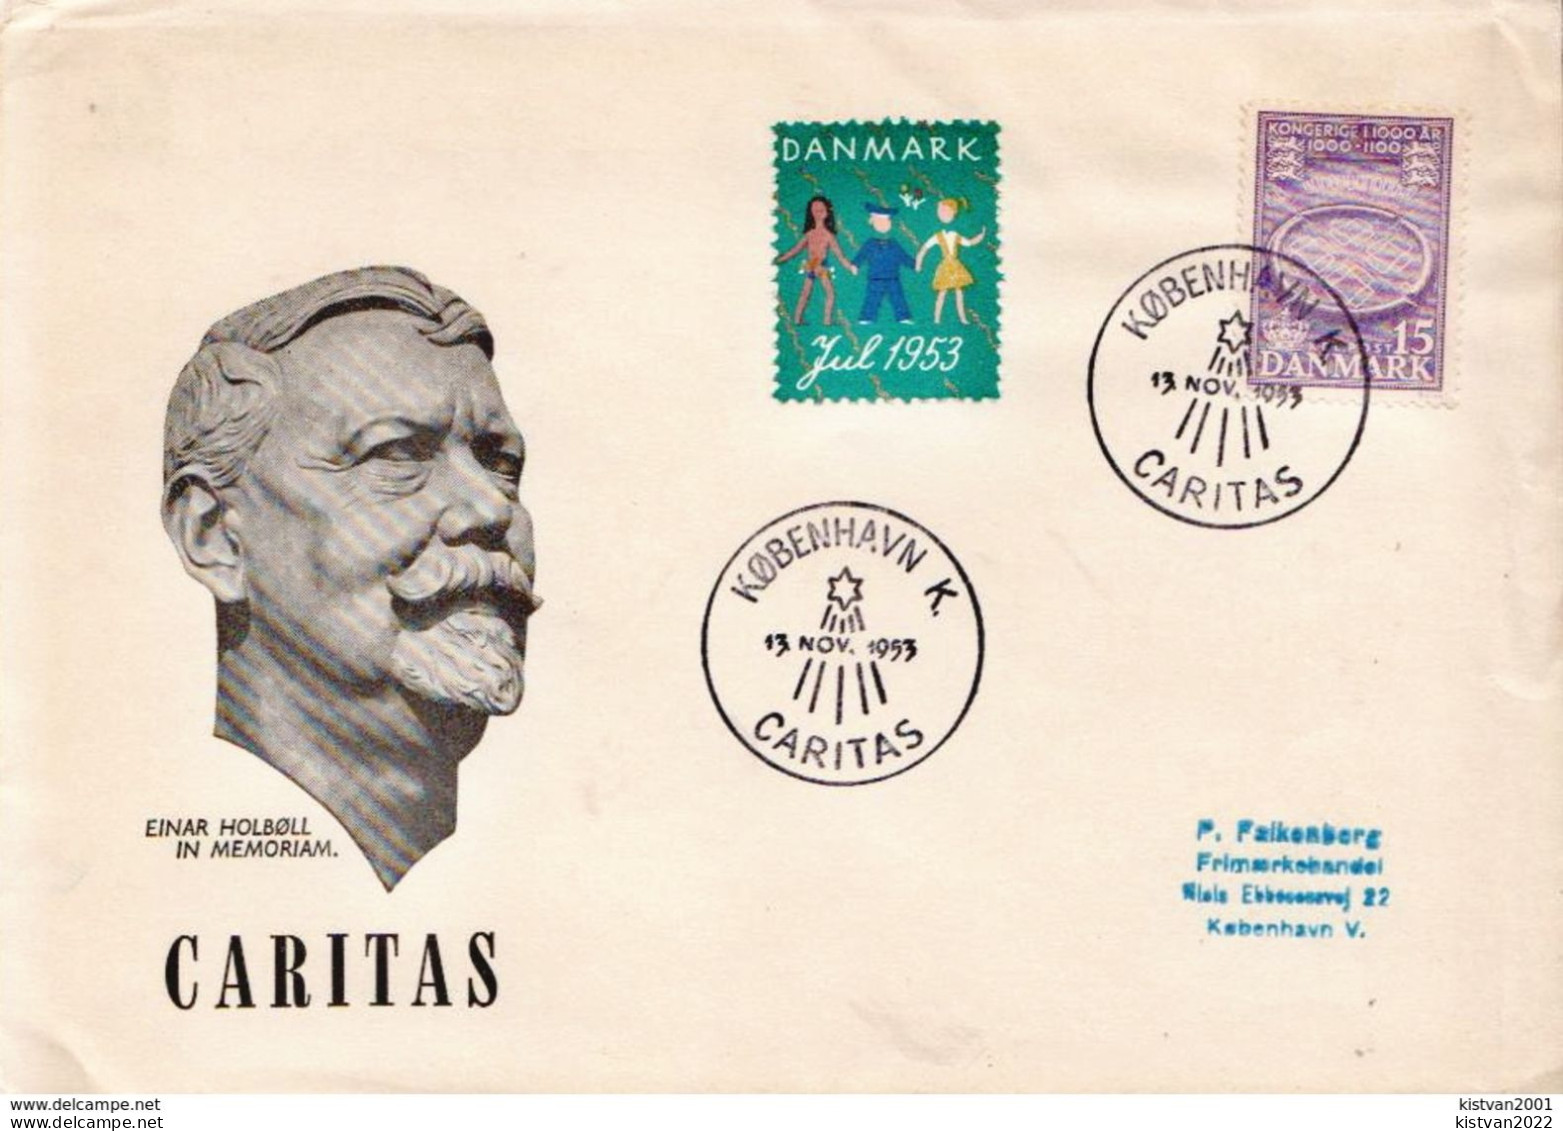 Postal History Cover: Denmark Cover With Caritas Cancel From 1953 - Covers & Documents